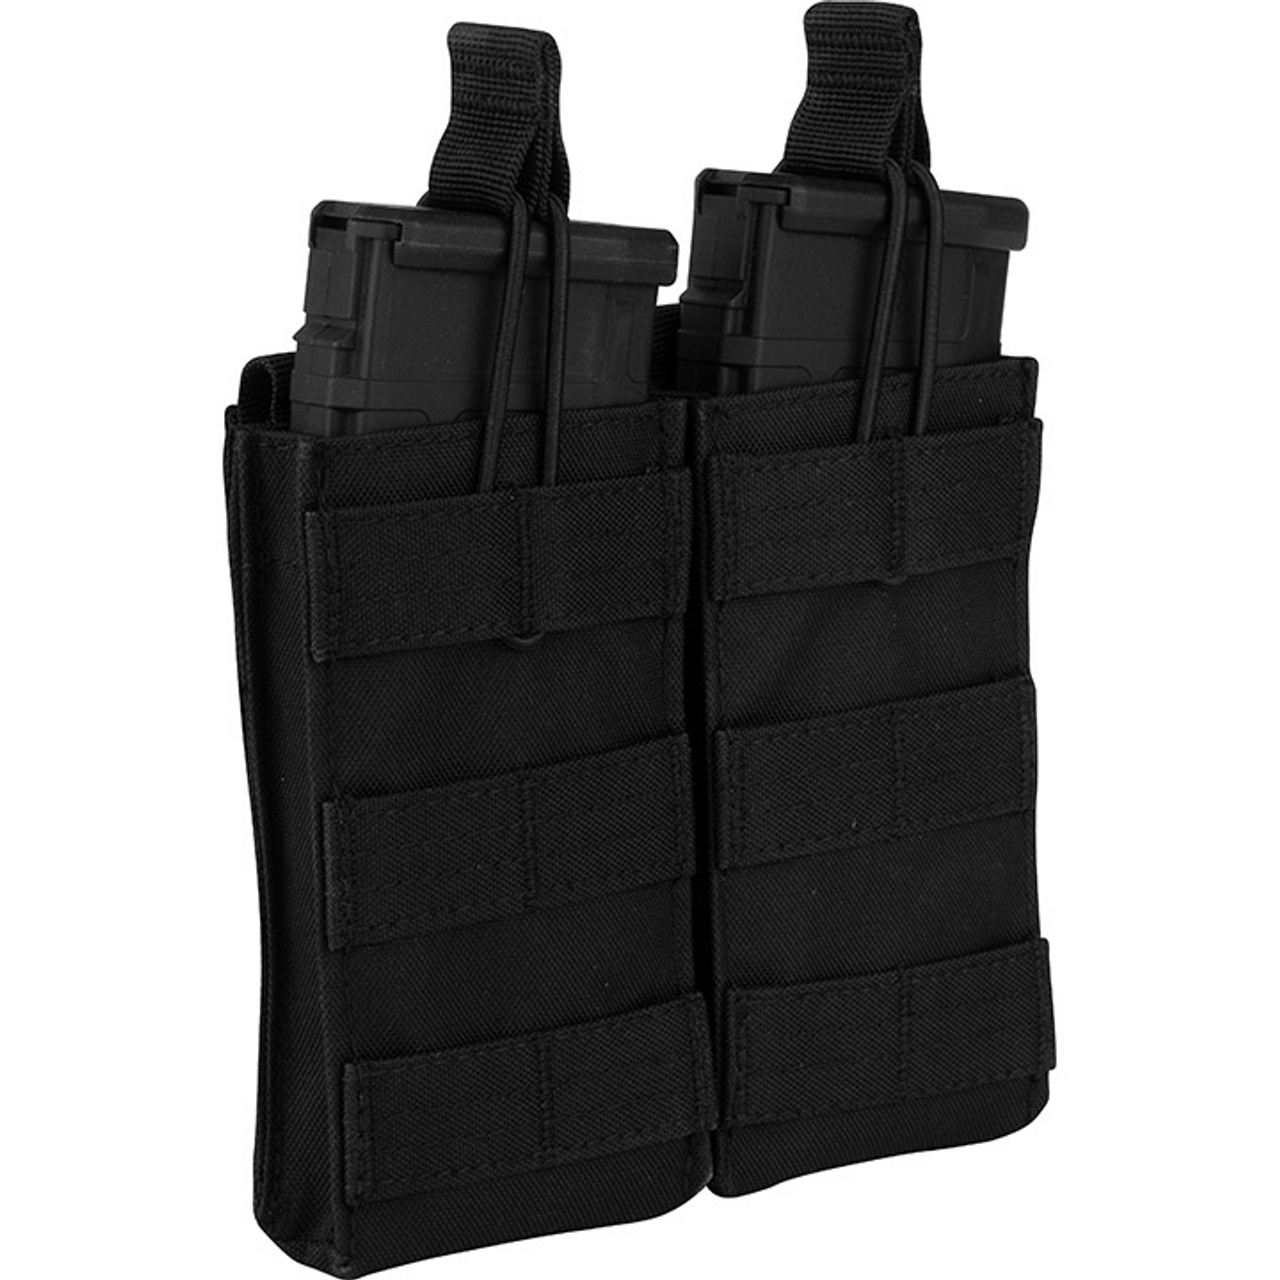 Viper Quick Release Double Mag Pouch - Black